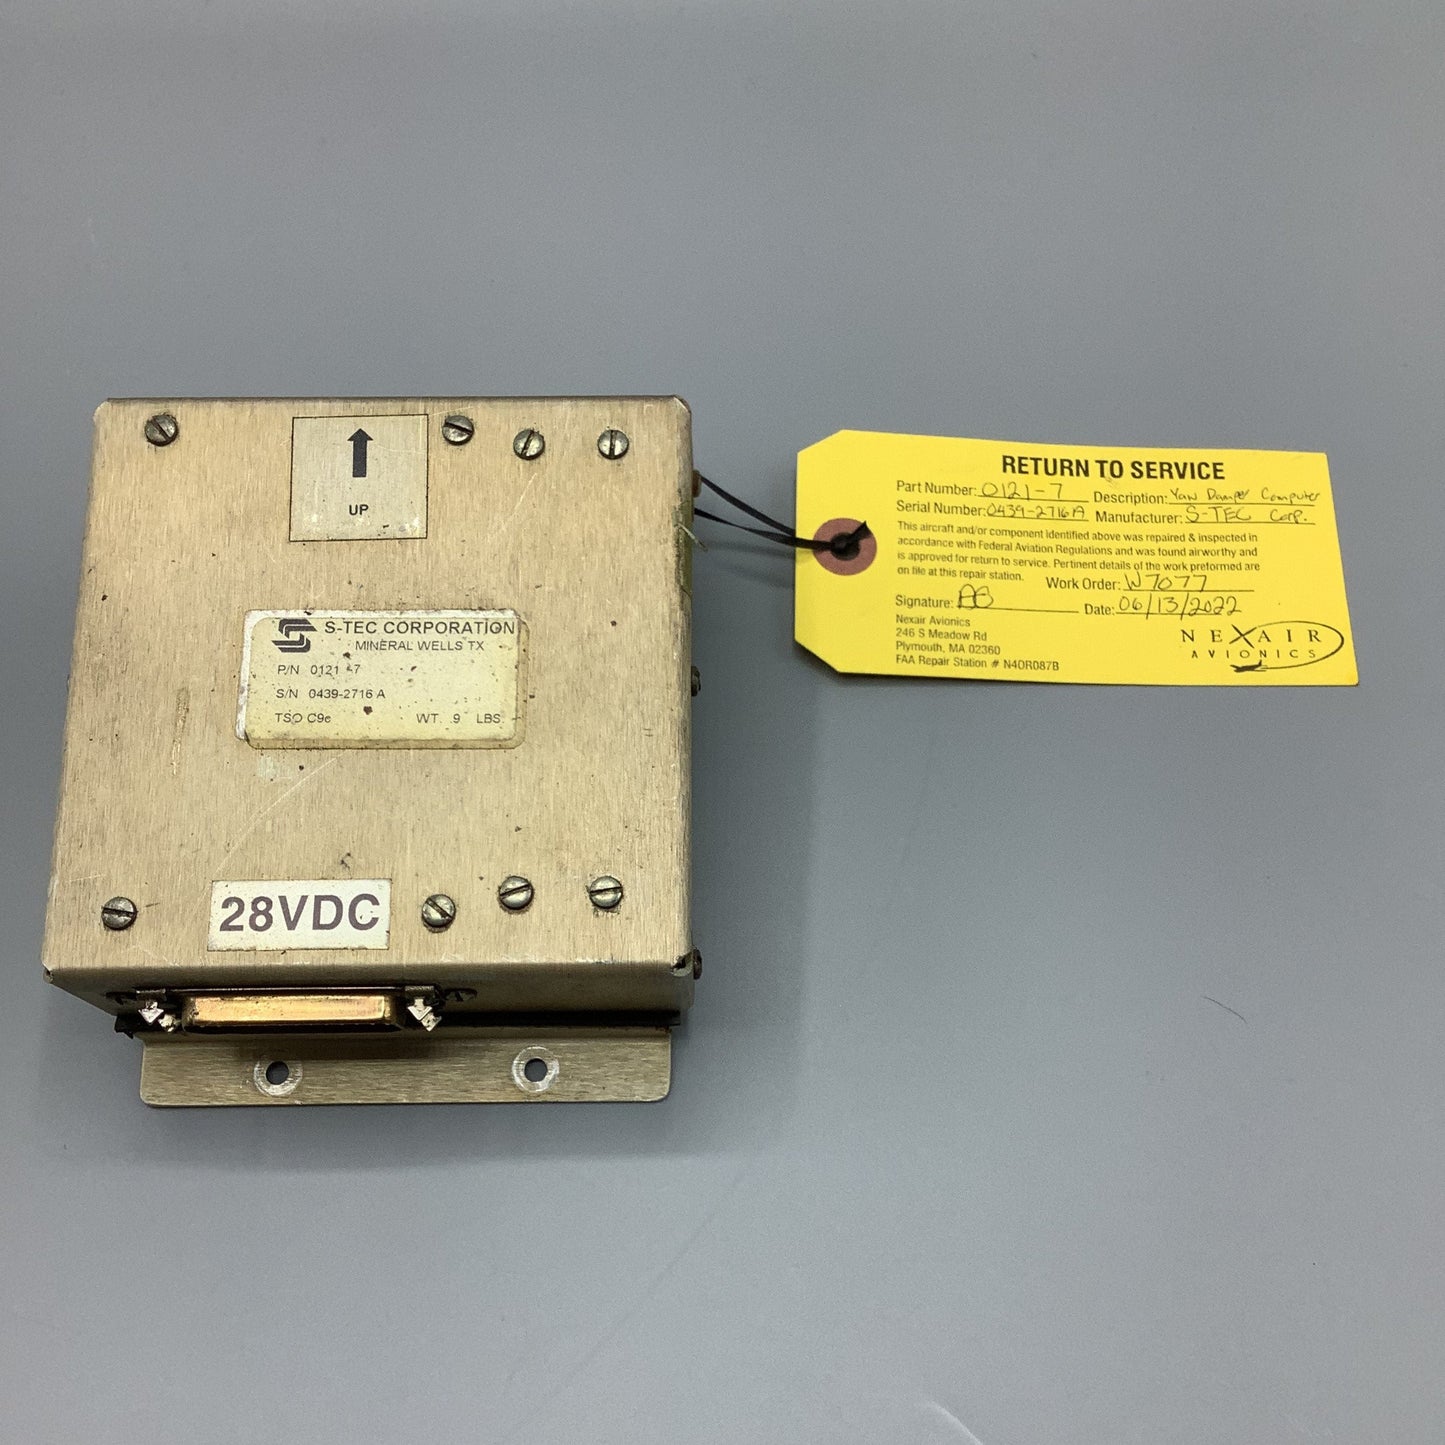 STEC Yaw Computer Amplifier - Part Number:0121-7